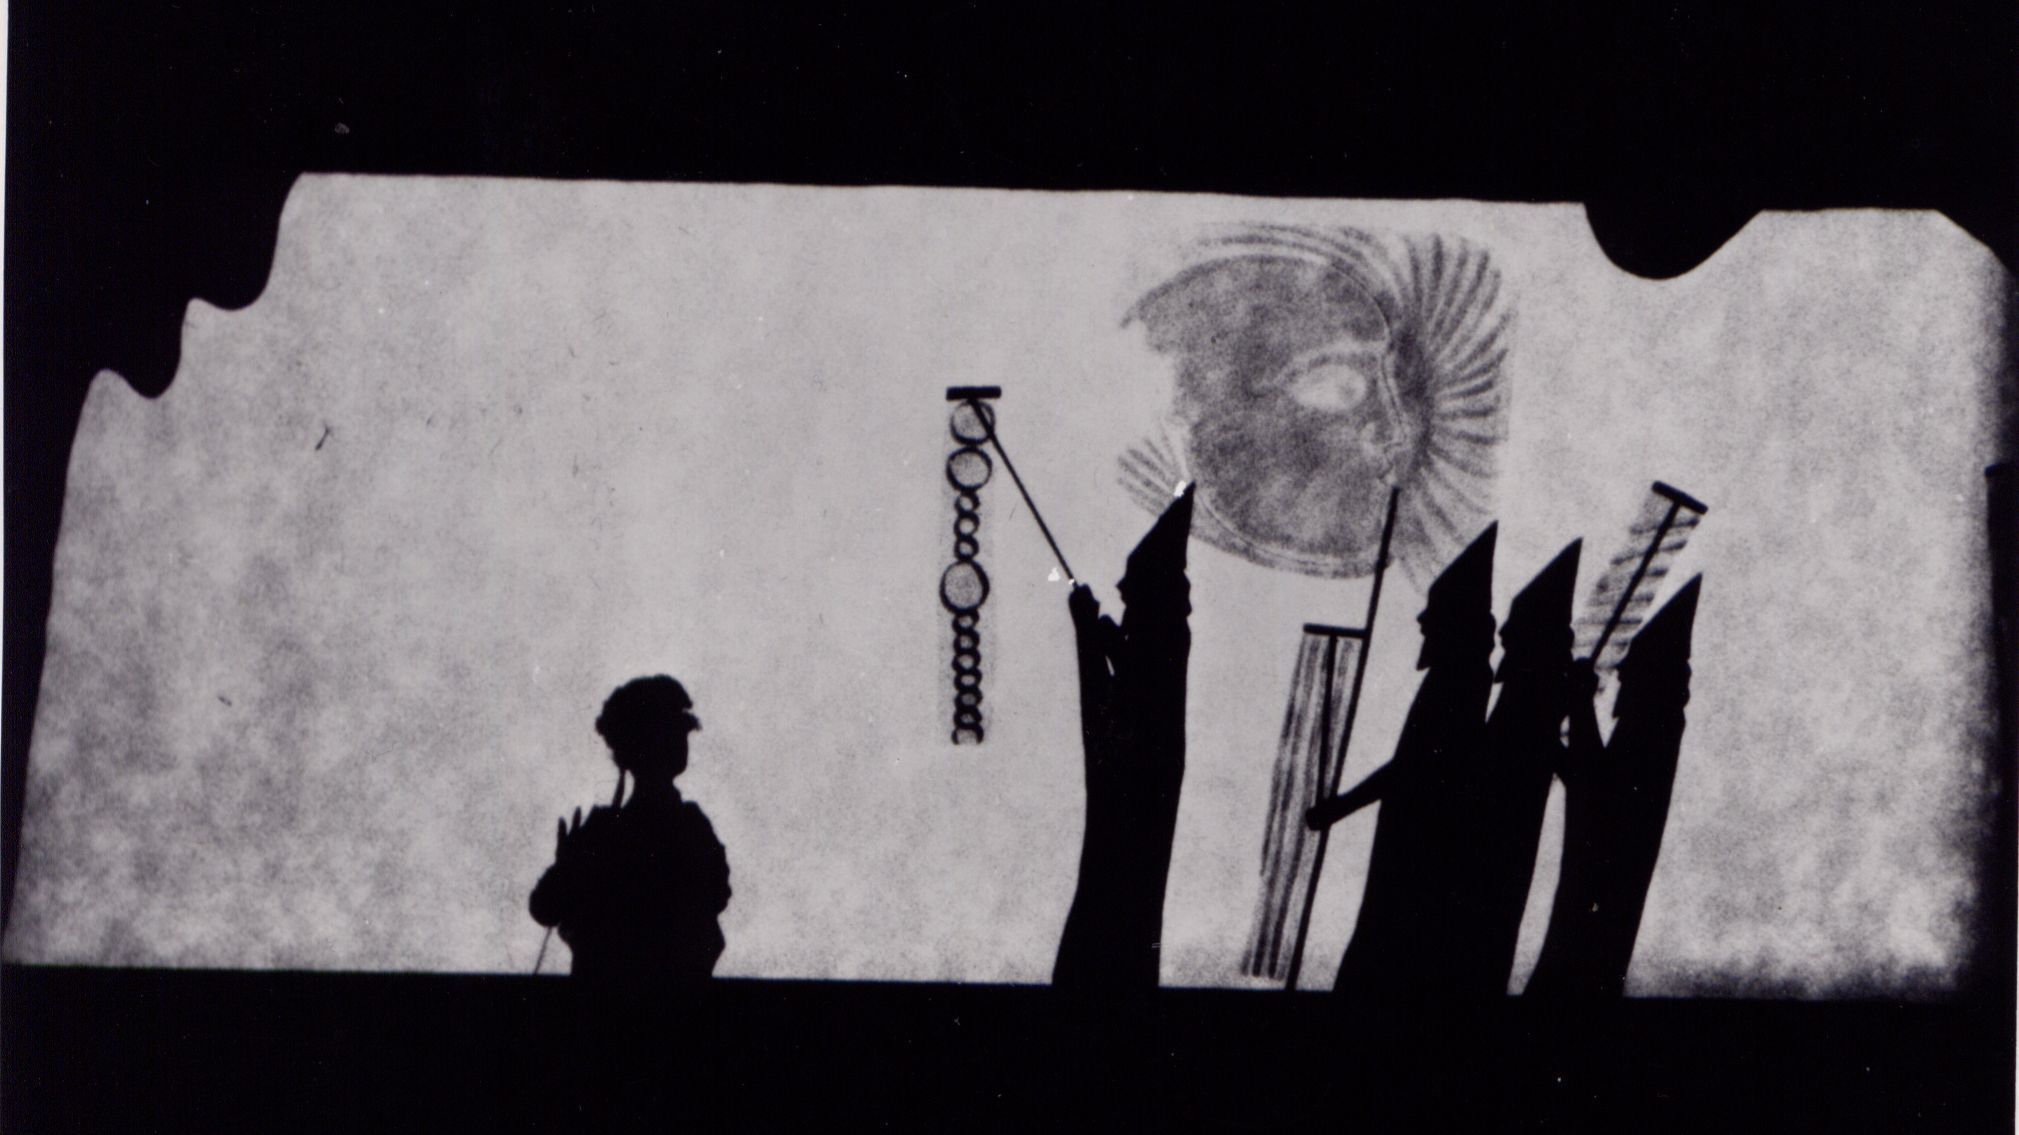 The original shadow puppet performance of "Young Caesar" at Caltech in 1971.